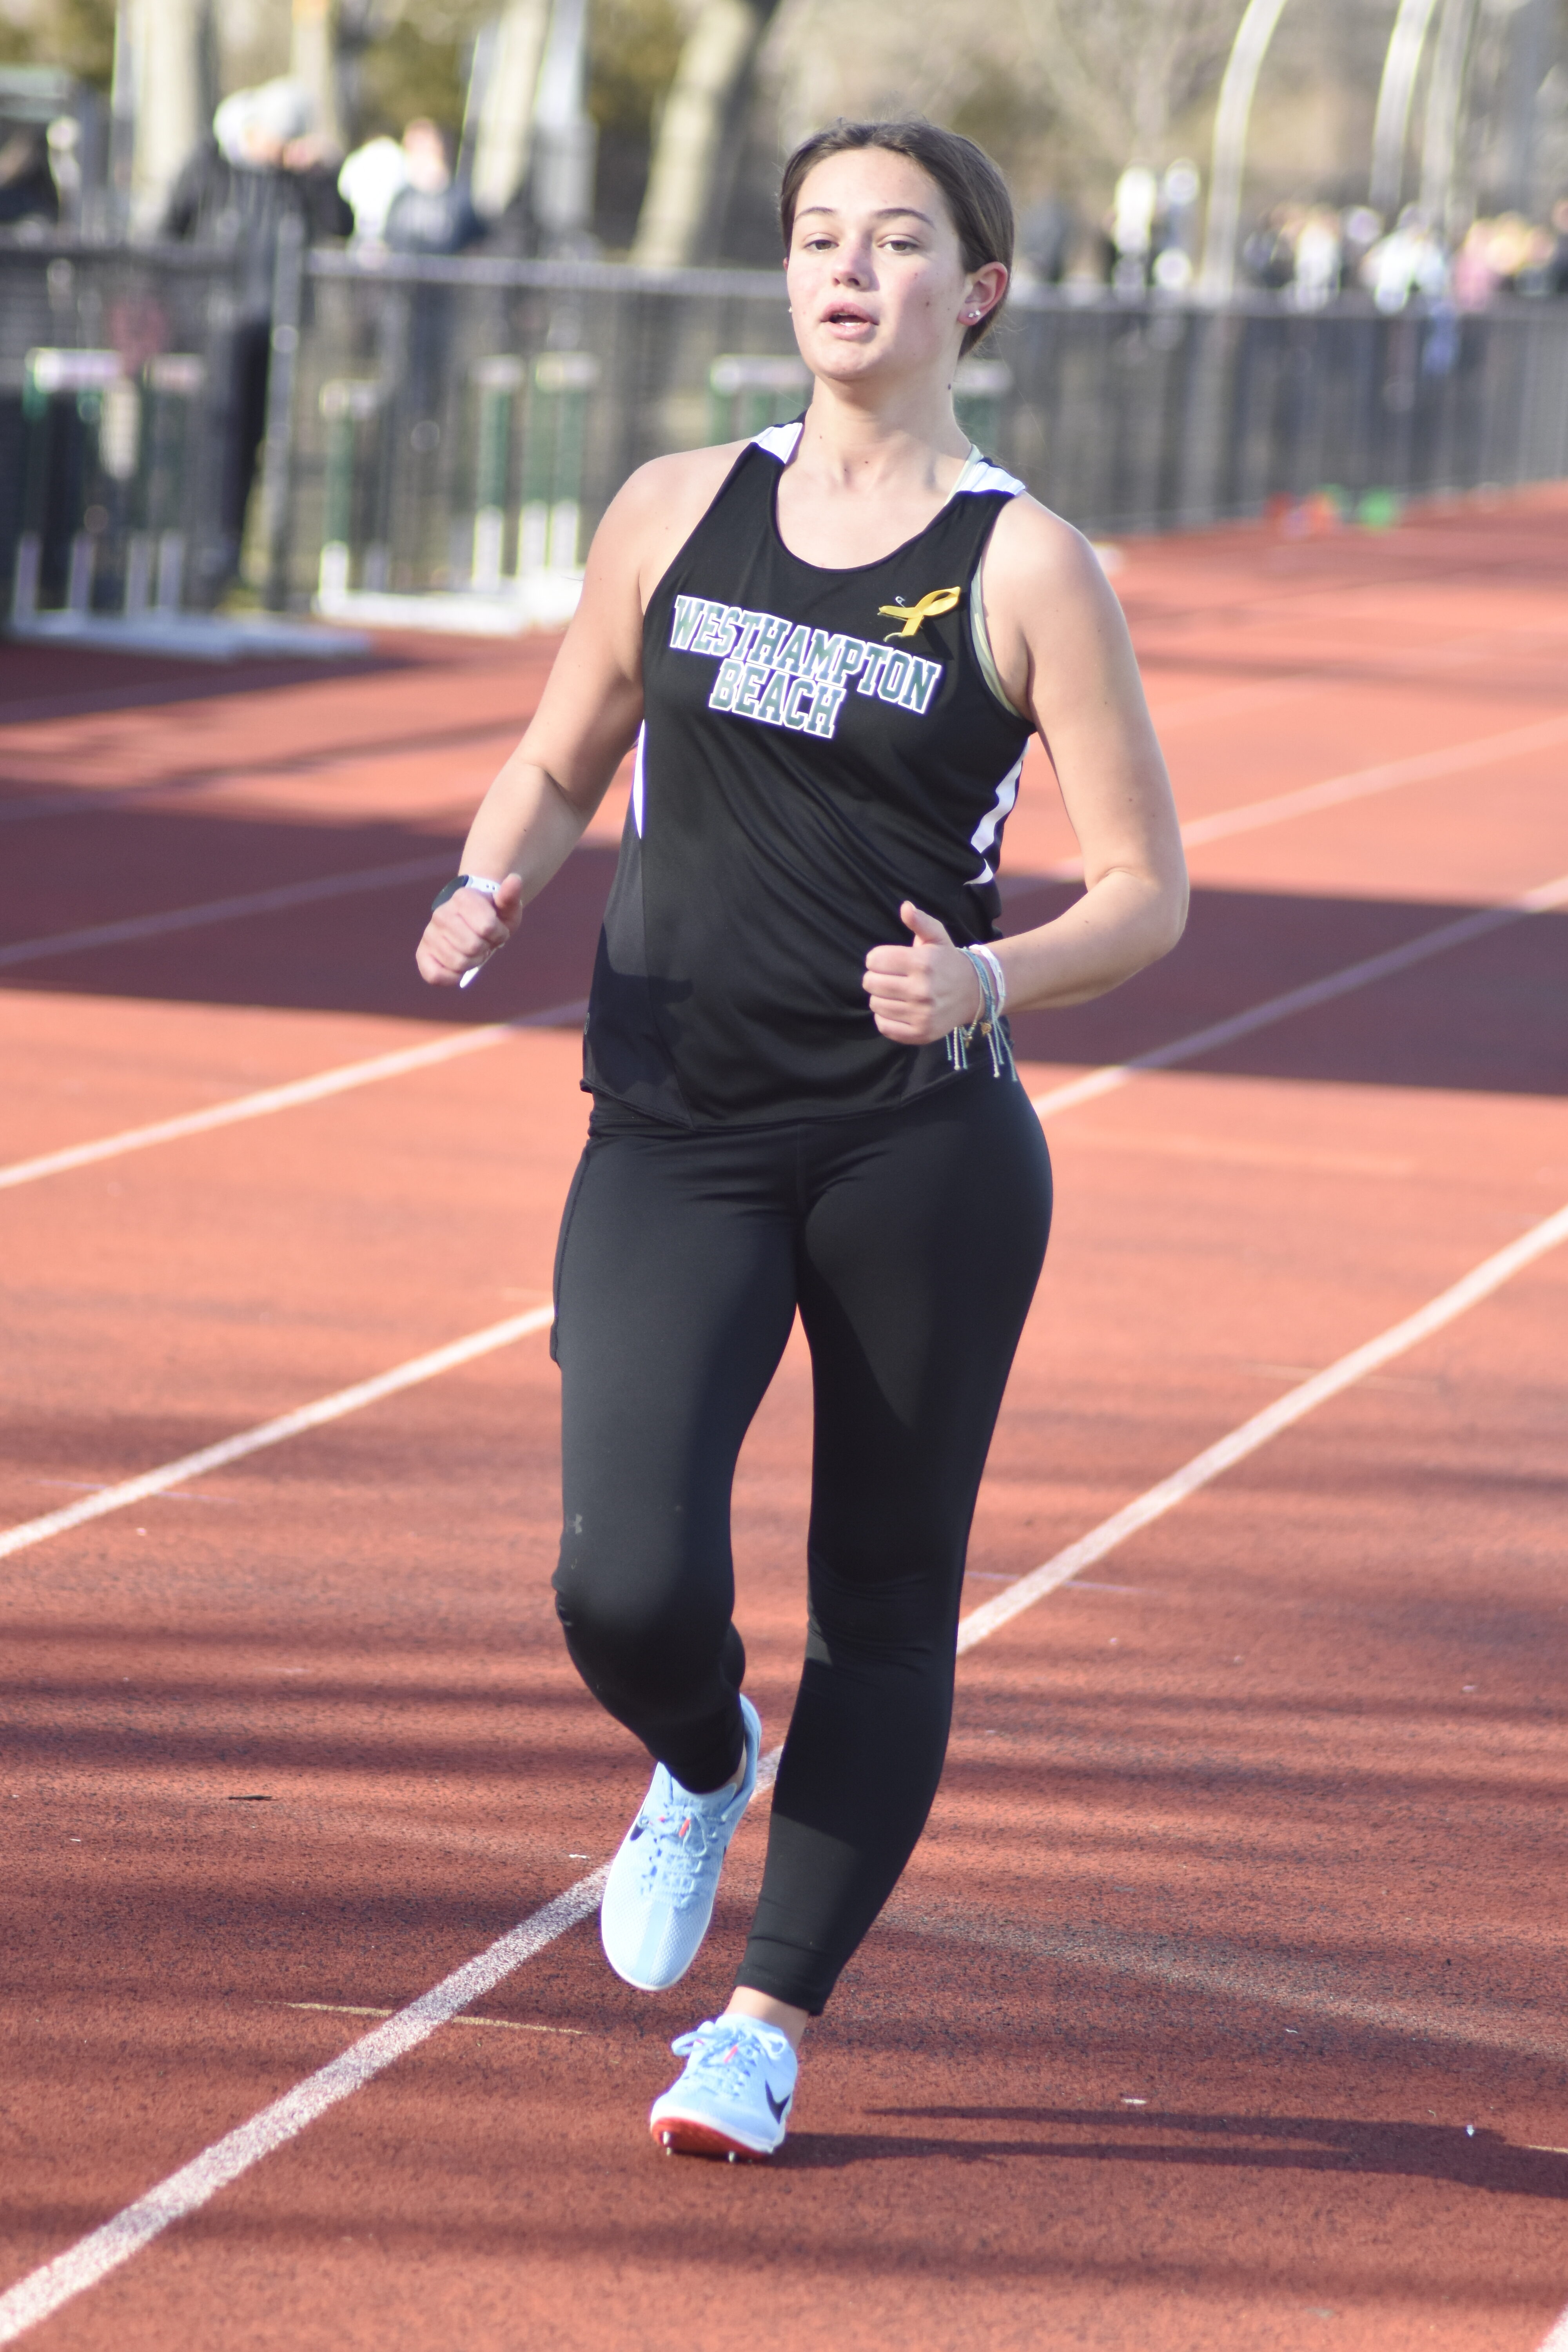 Sydney Beardslee will be a consistent point scorer for the Westhampton Beach girls in the 1,500-meter race walk this season.   DREW BUDD